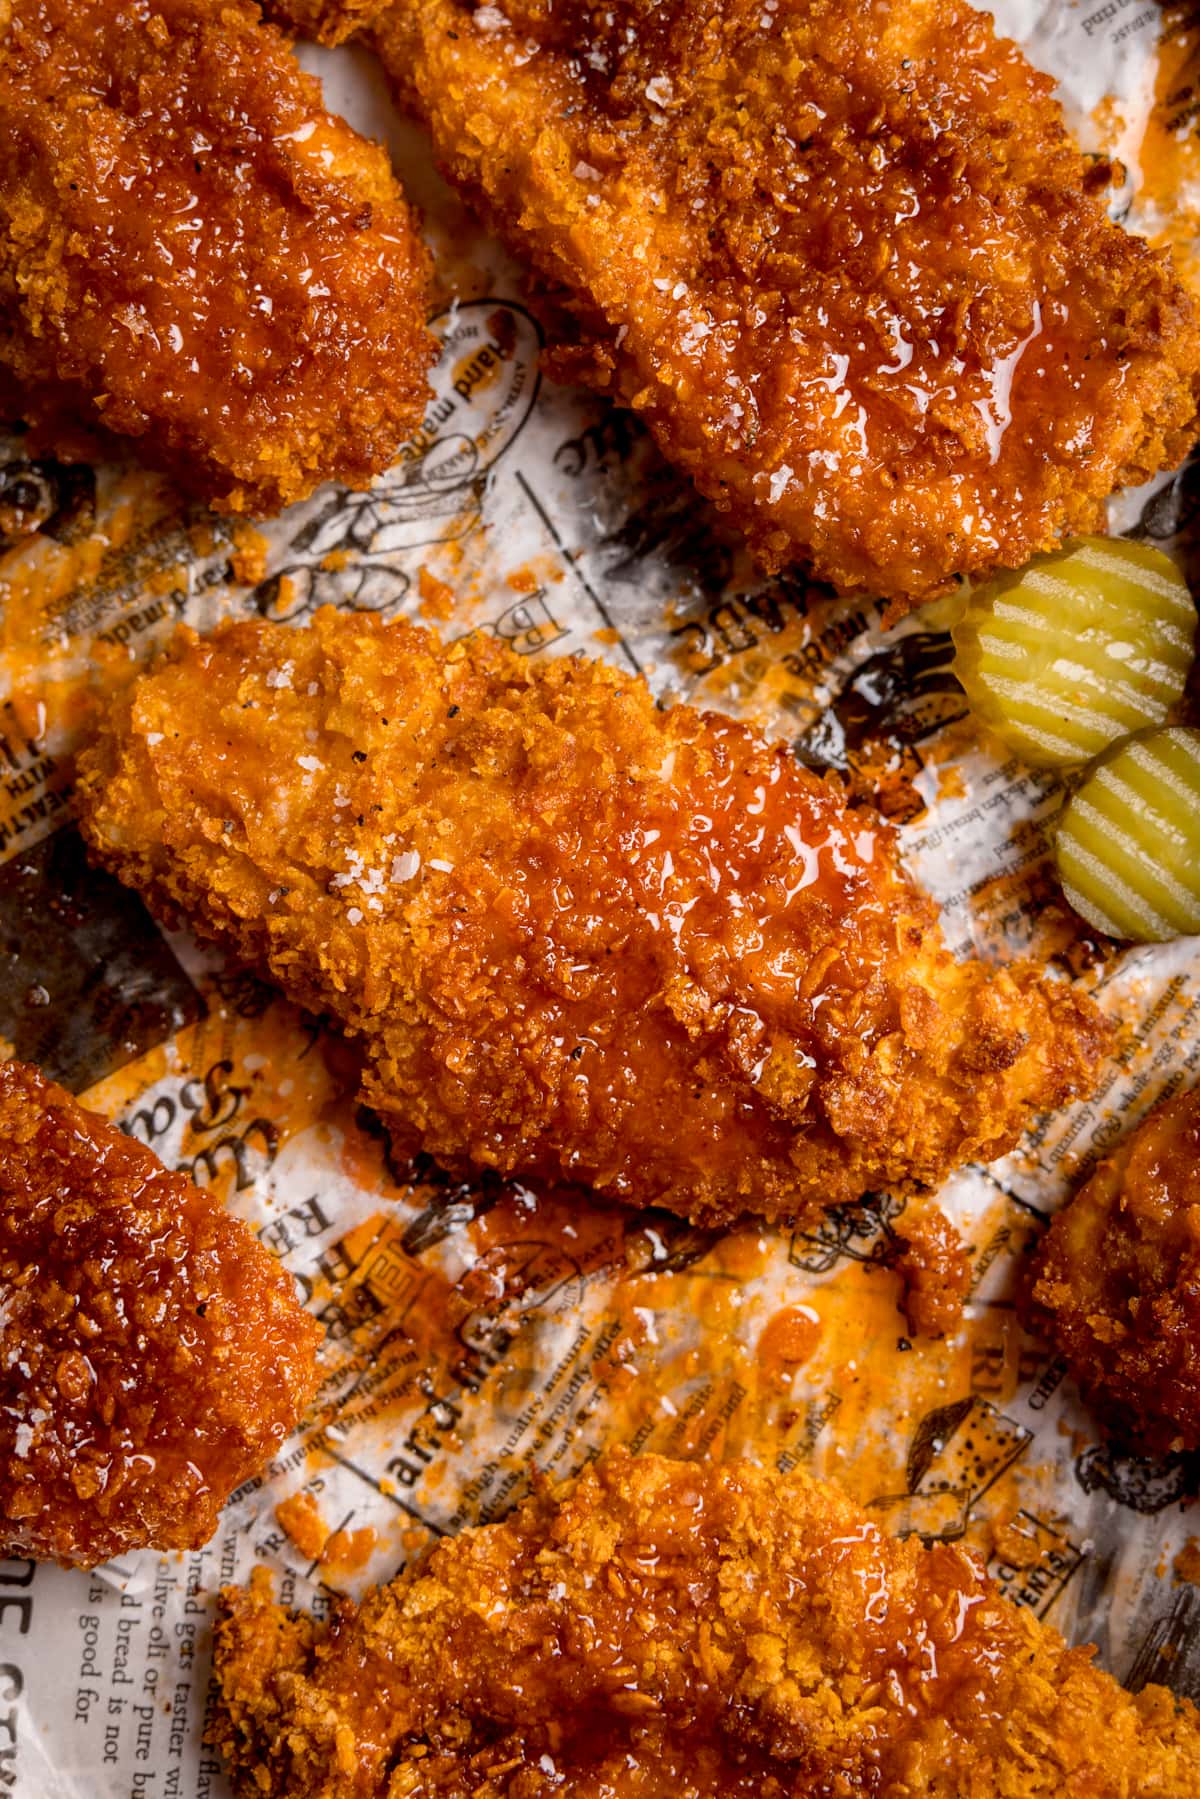 Overhead close-up image of crispy baked chicken breast fillets on a baking tray with sliced pickles. The chicken has been drizzled with hot honey sauce.